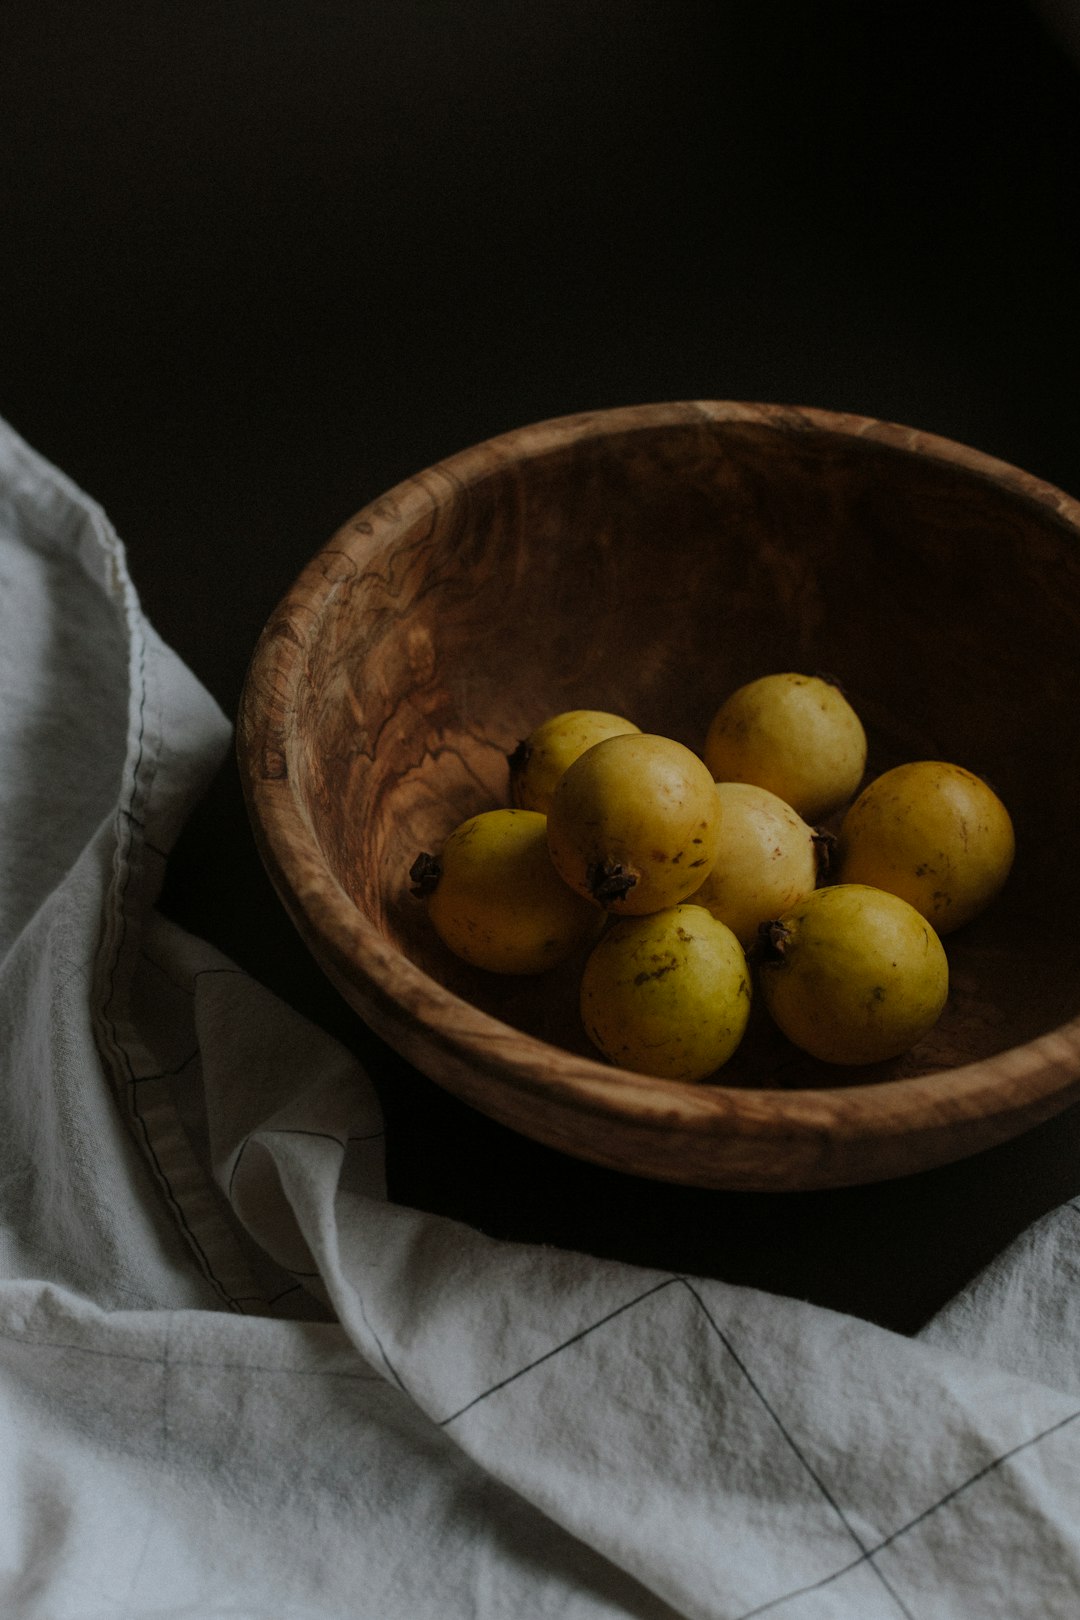 yellow round fruits in brown wooden bowl